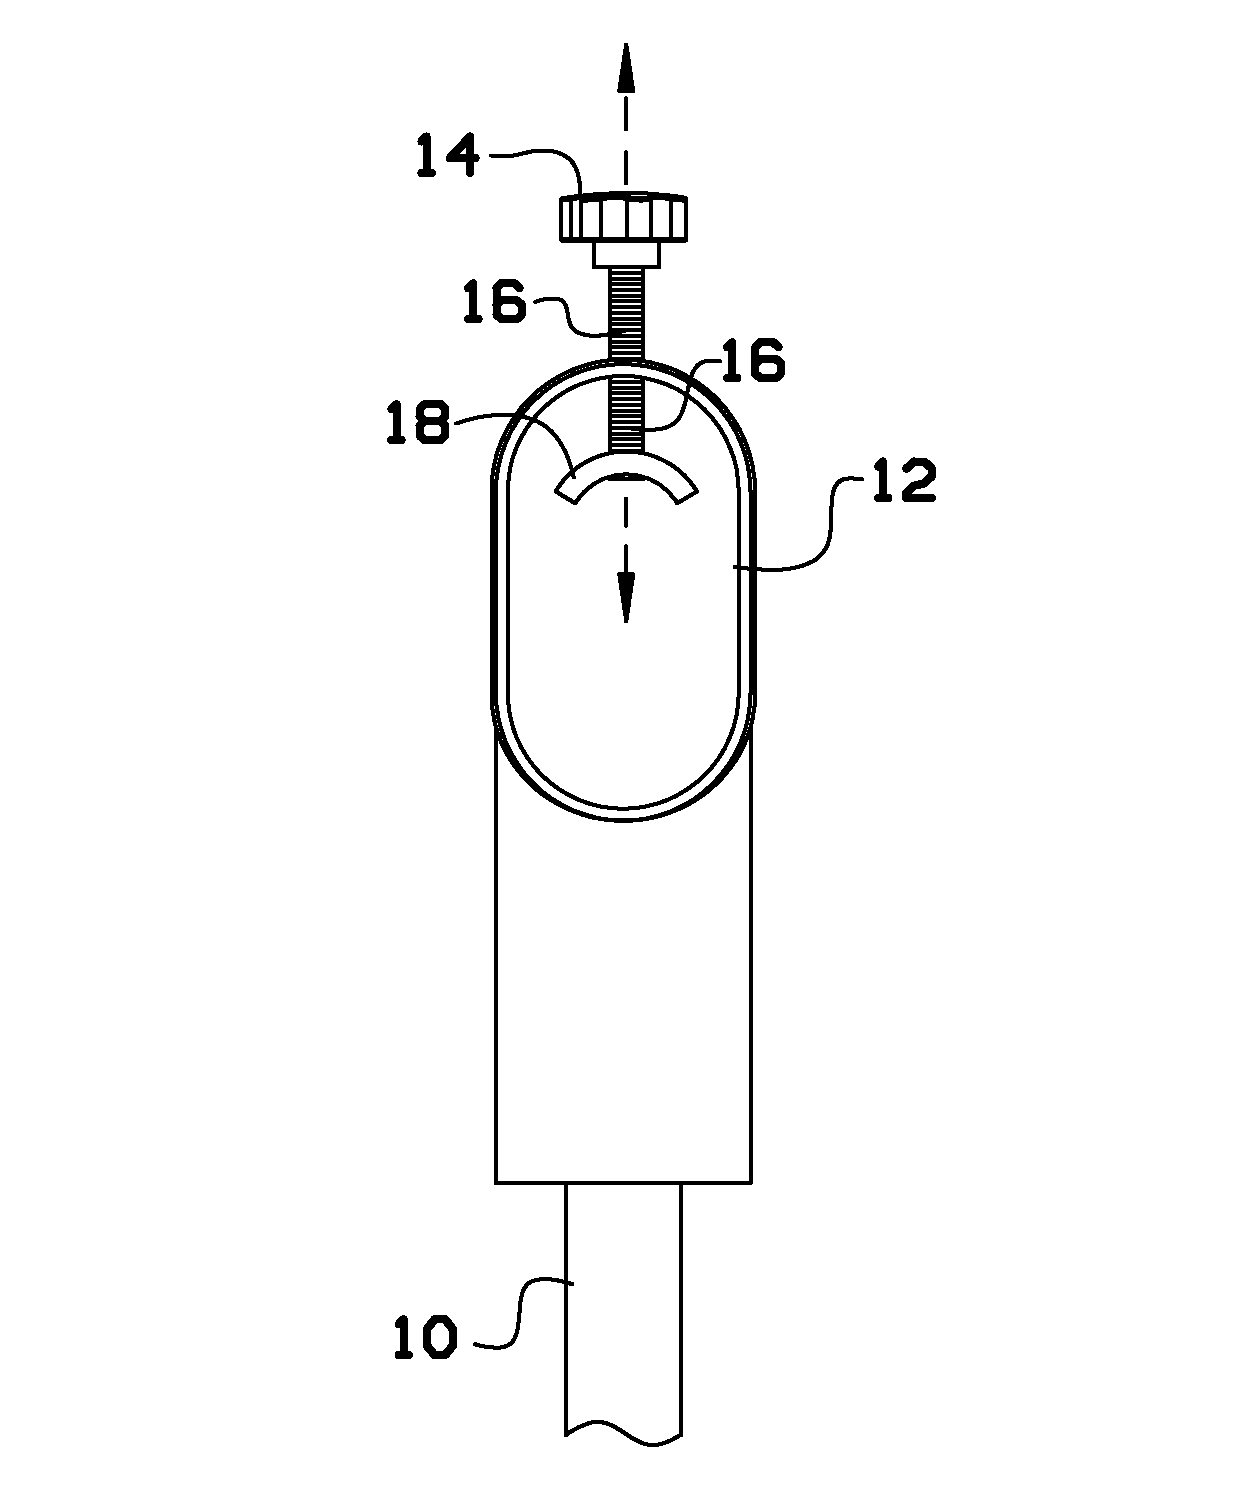 Apparatus for applying roll-on and rub-on medications